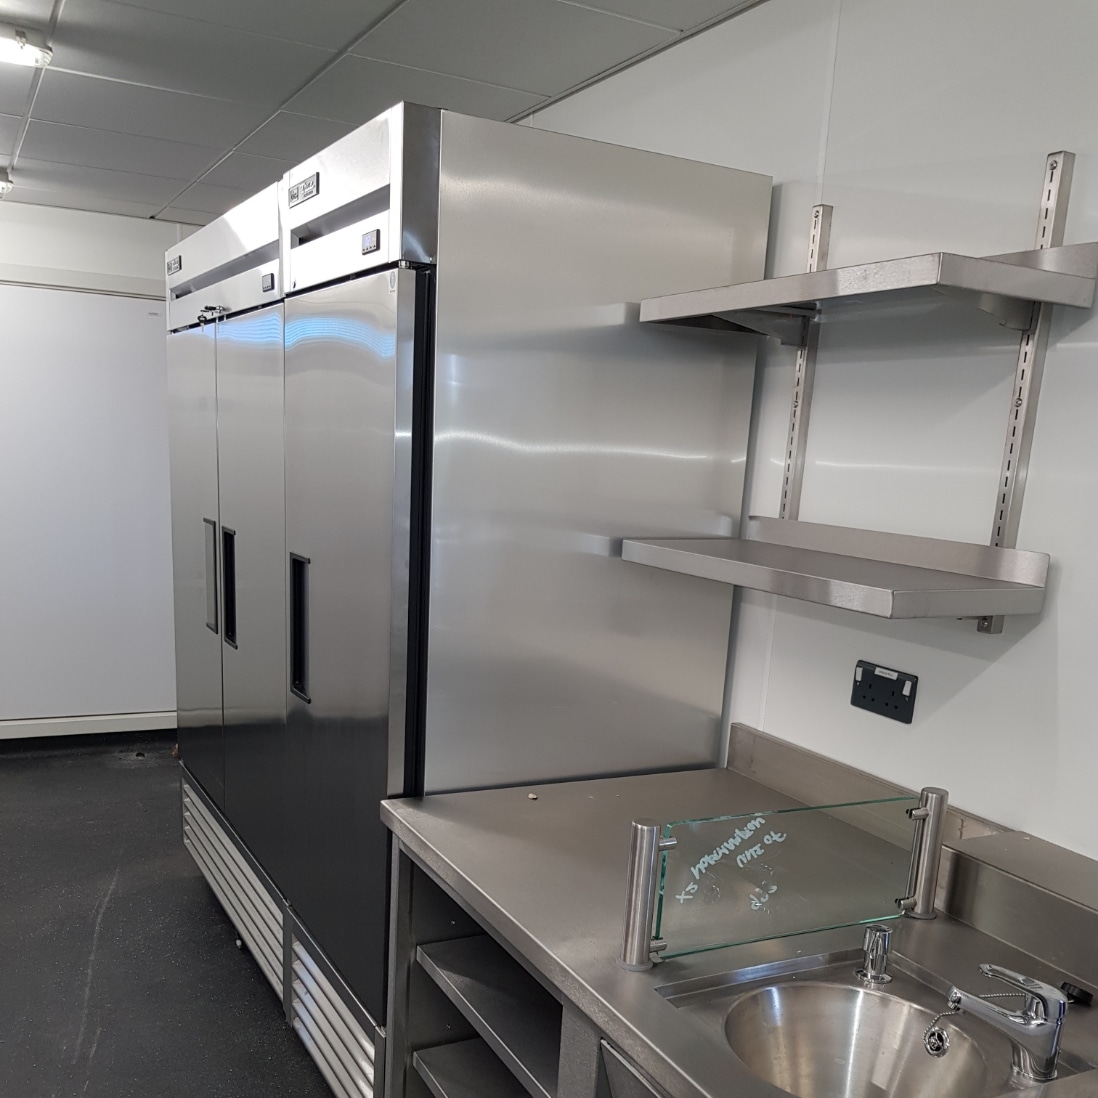 commercial refrigeration equipment in a kitchen